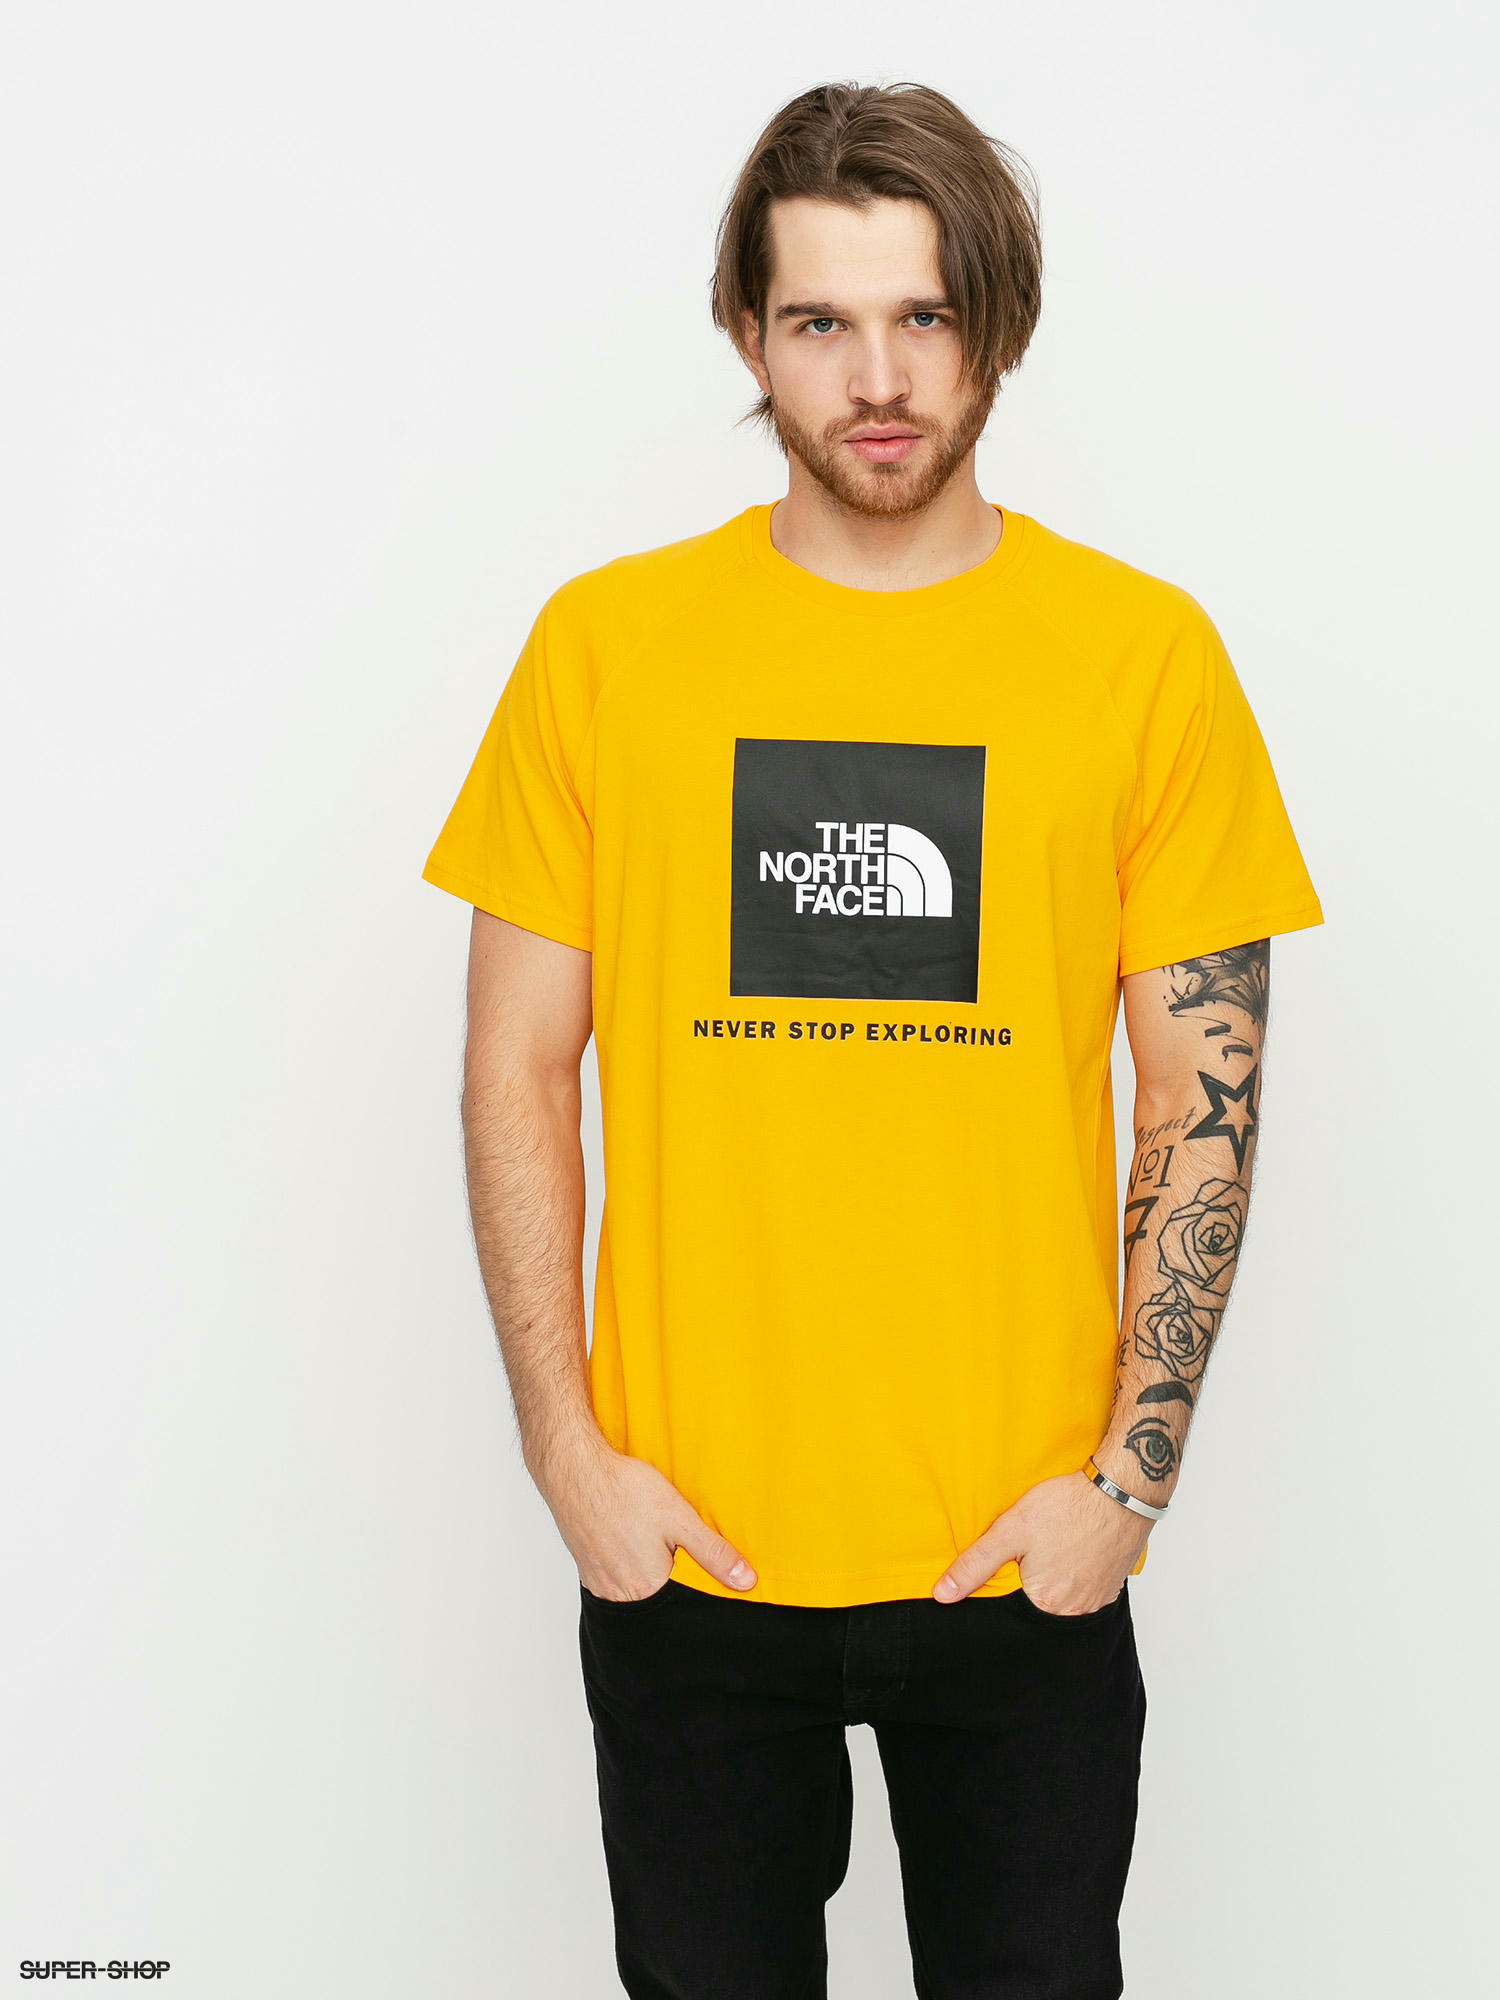 north face yellow top